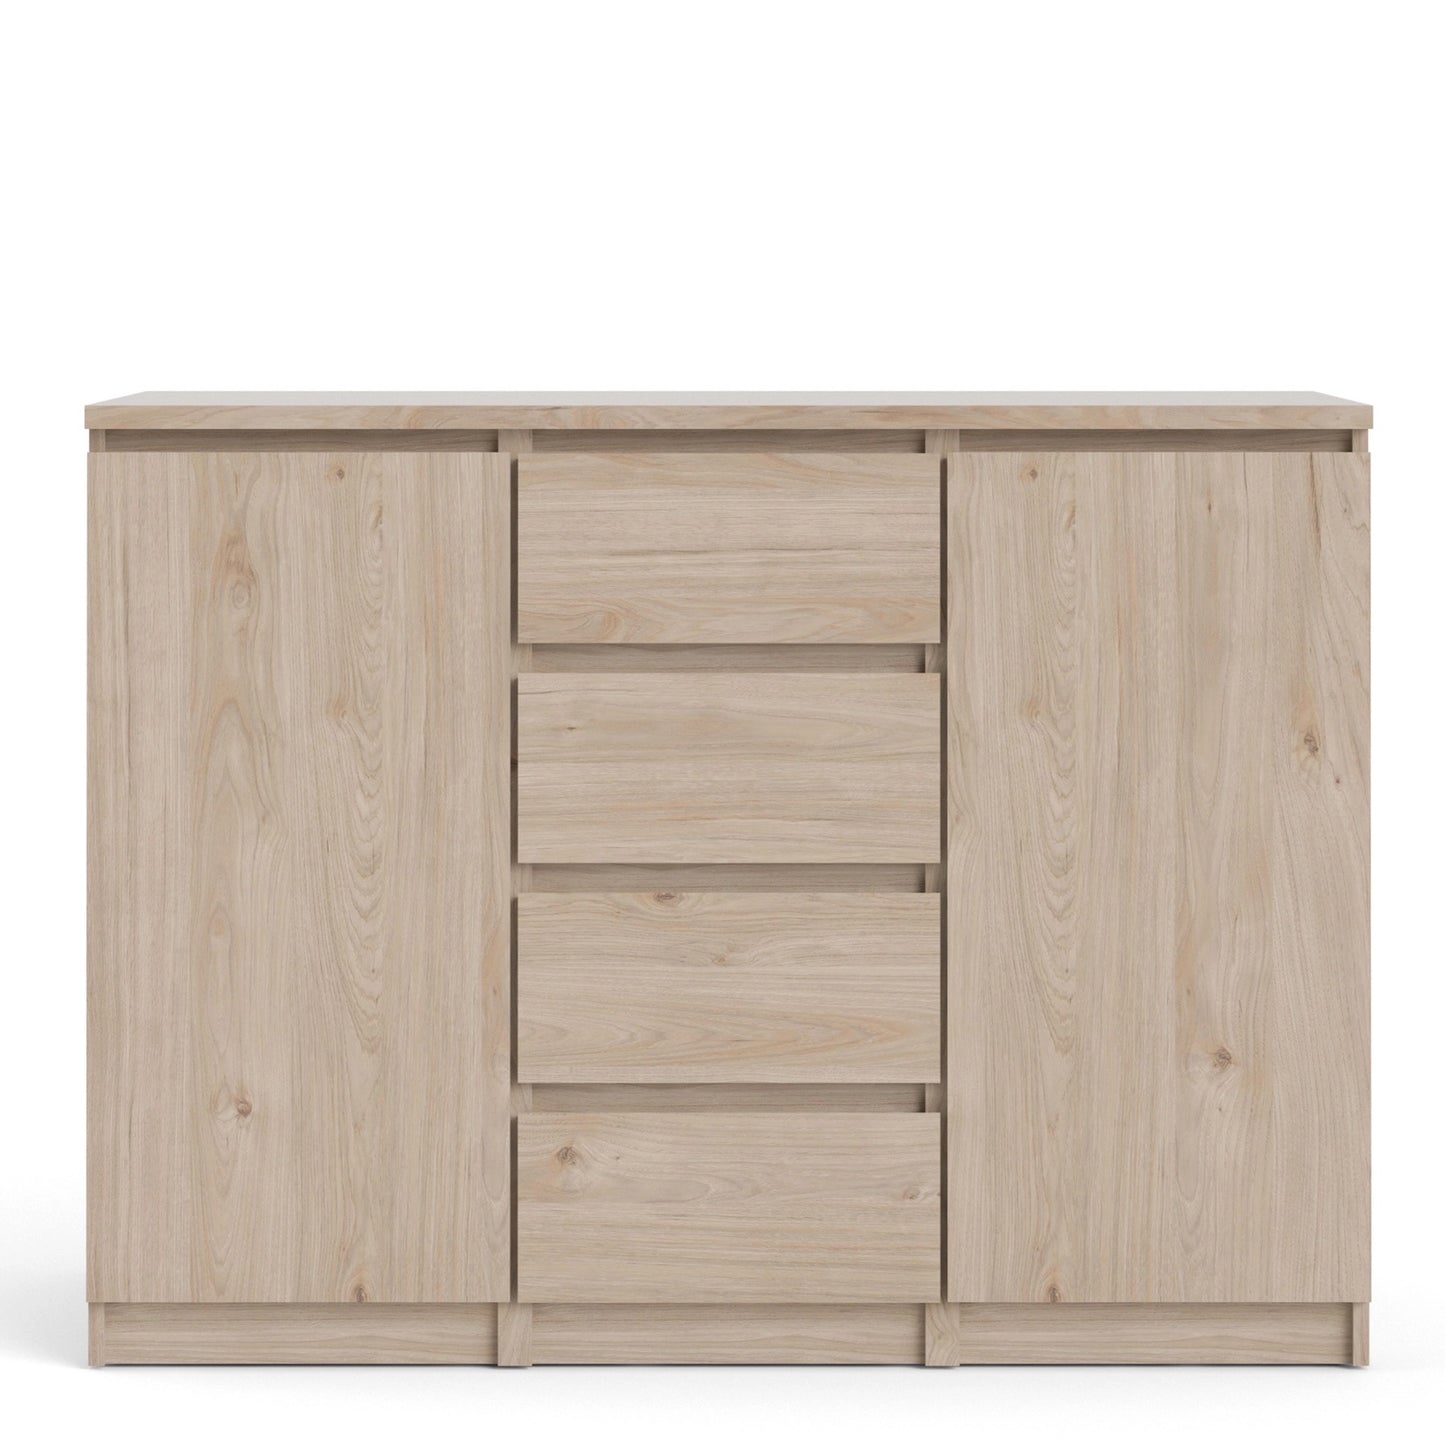 Furniture To Go Naia Sideboard 4 Drawers 2 Doors in Jackson Hickory Oak